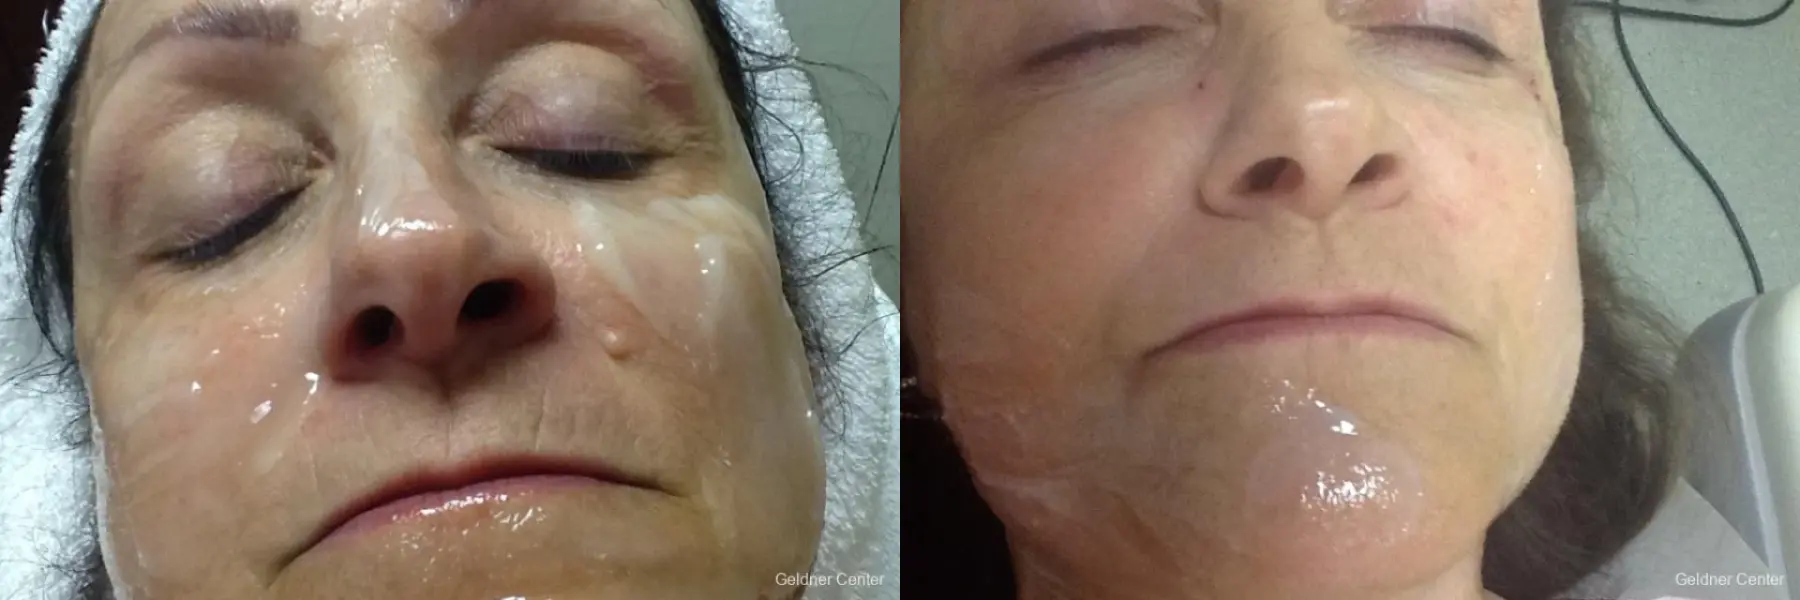 mole laser removal - Before and After 